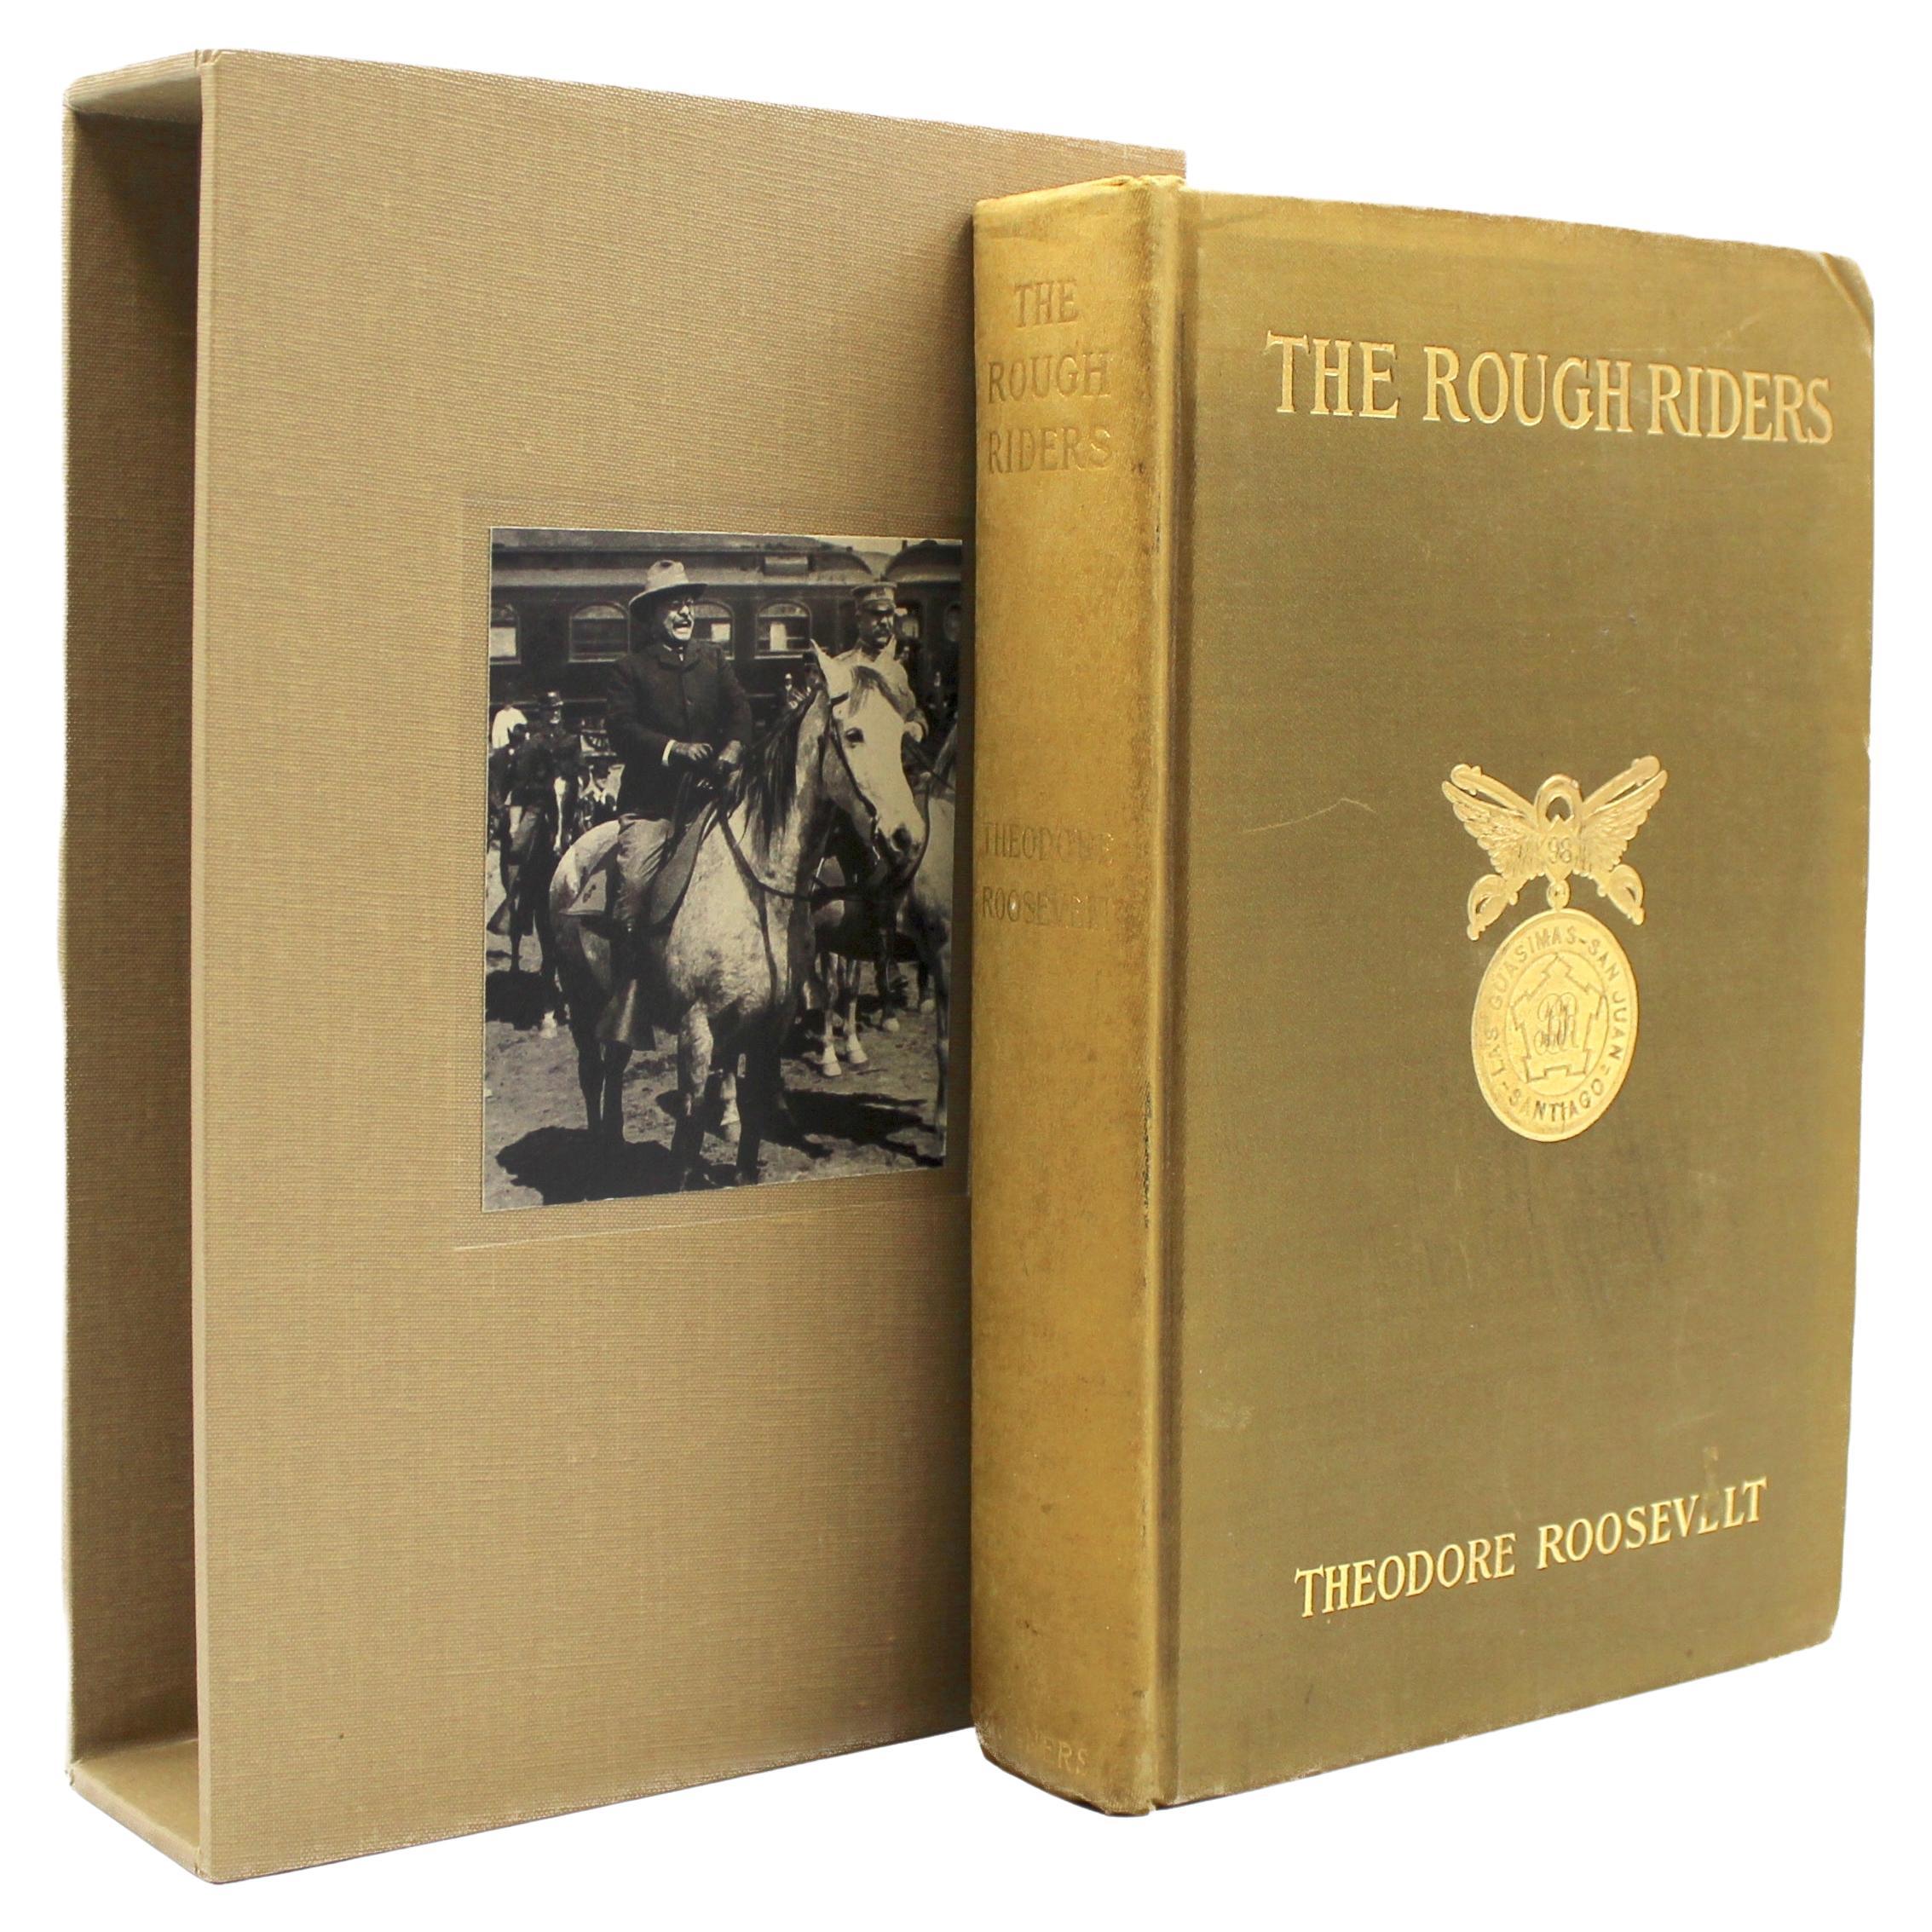 The Rough Riders by Theodore Roosevelt, First Edition, 1899